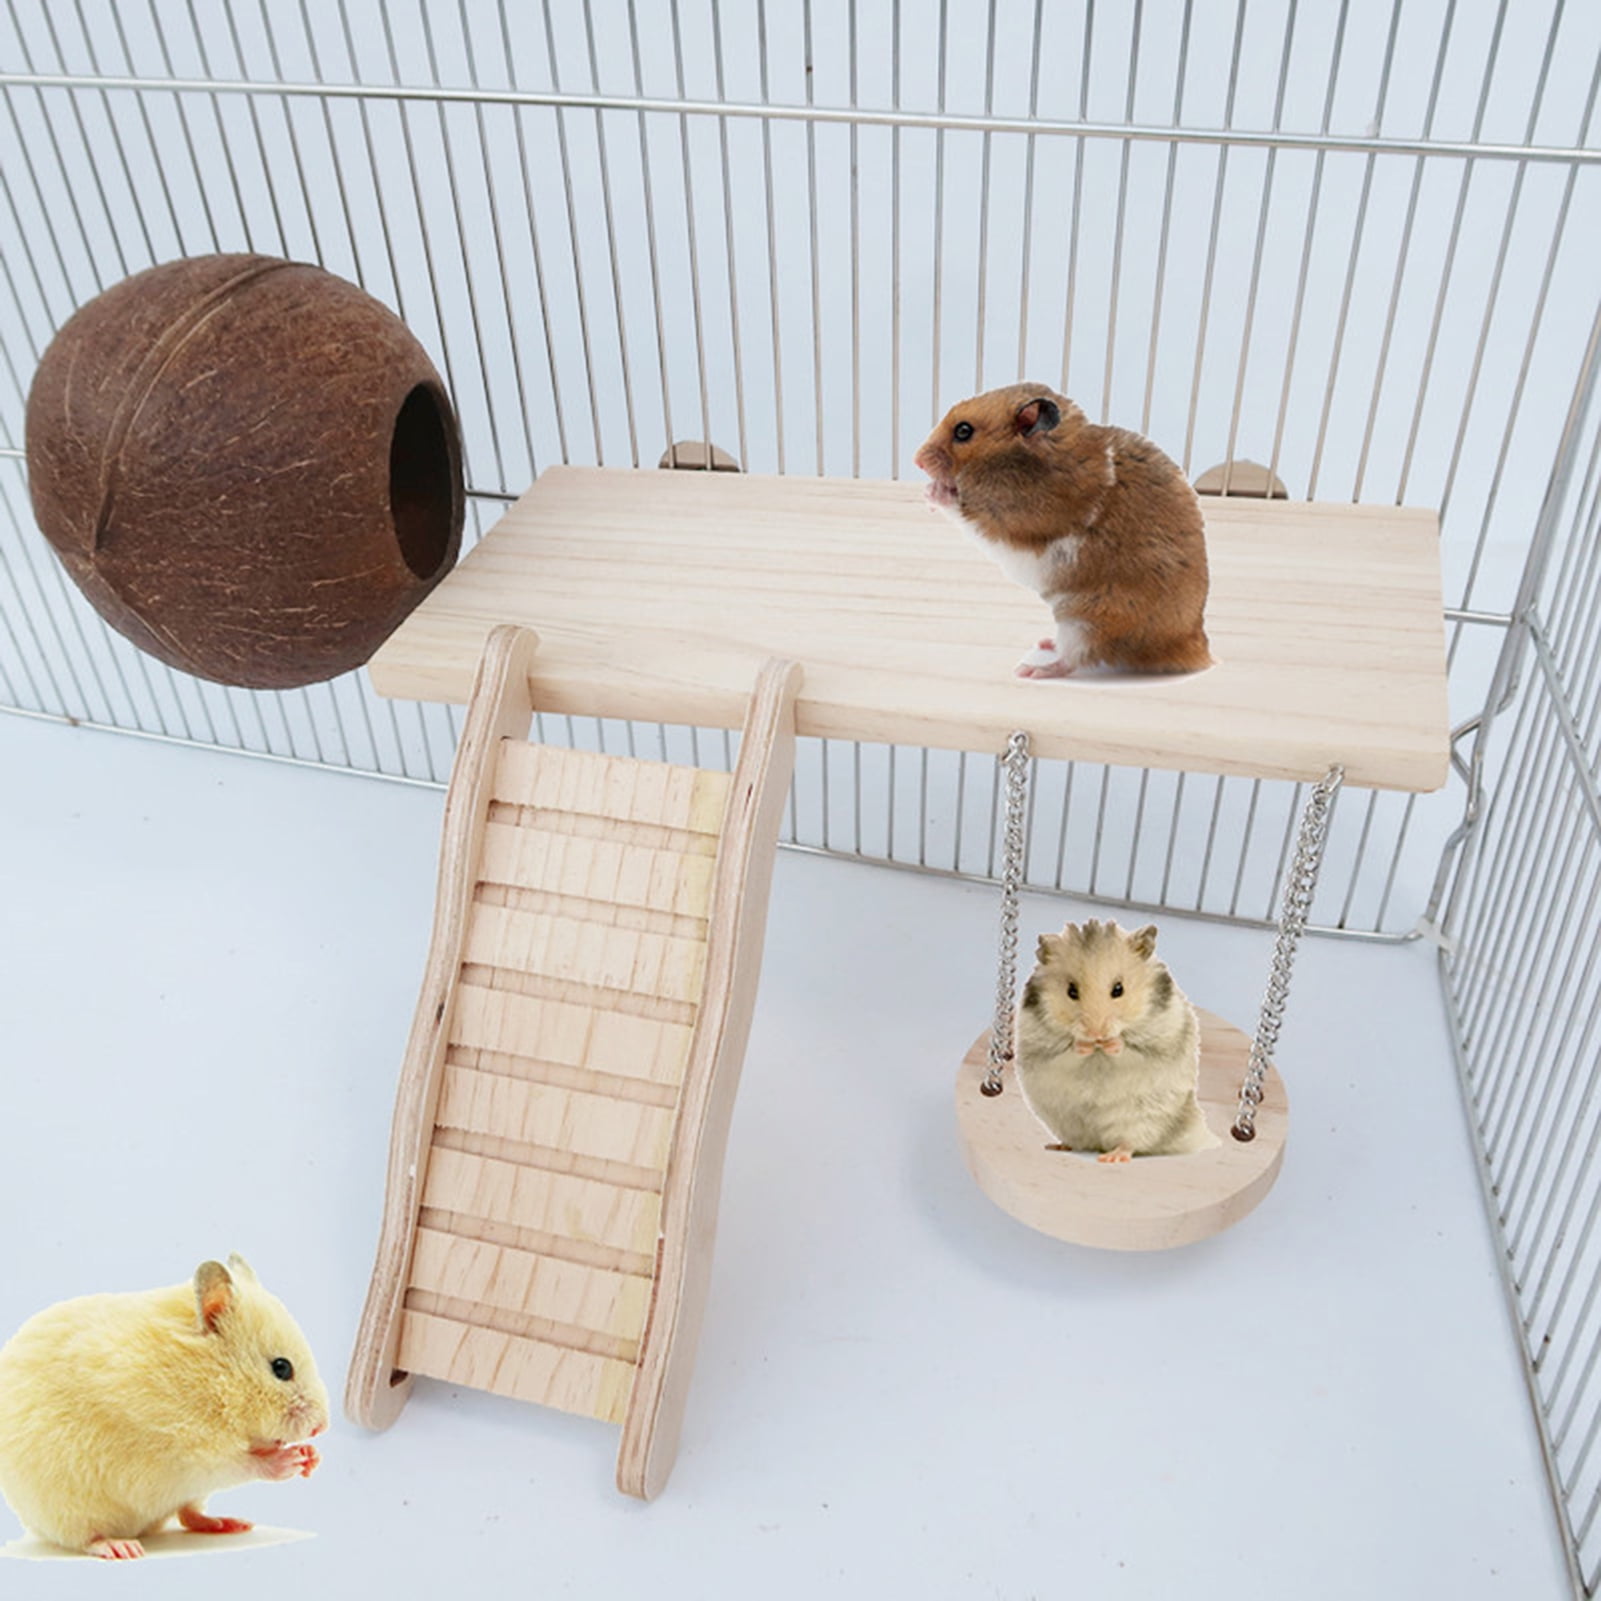 Hamster Play Wooden Platform Natural Wood Desk for Small Animal Cage Pet Bowl Drinking Bottle Stand